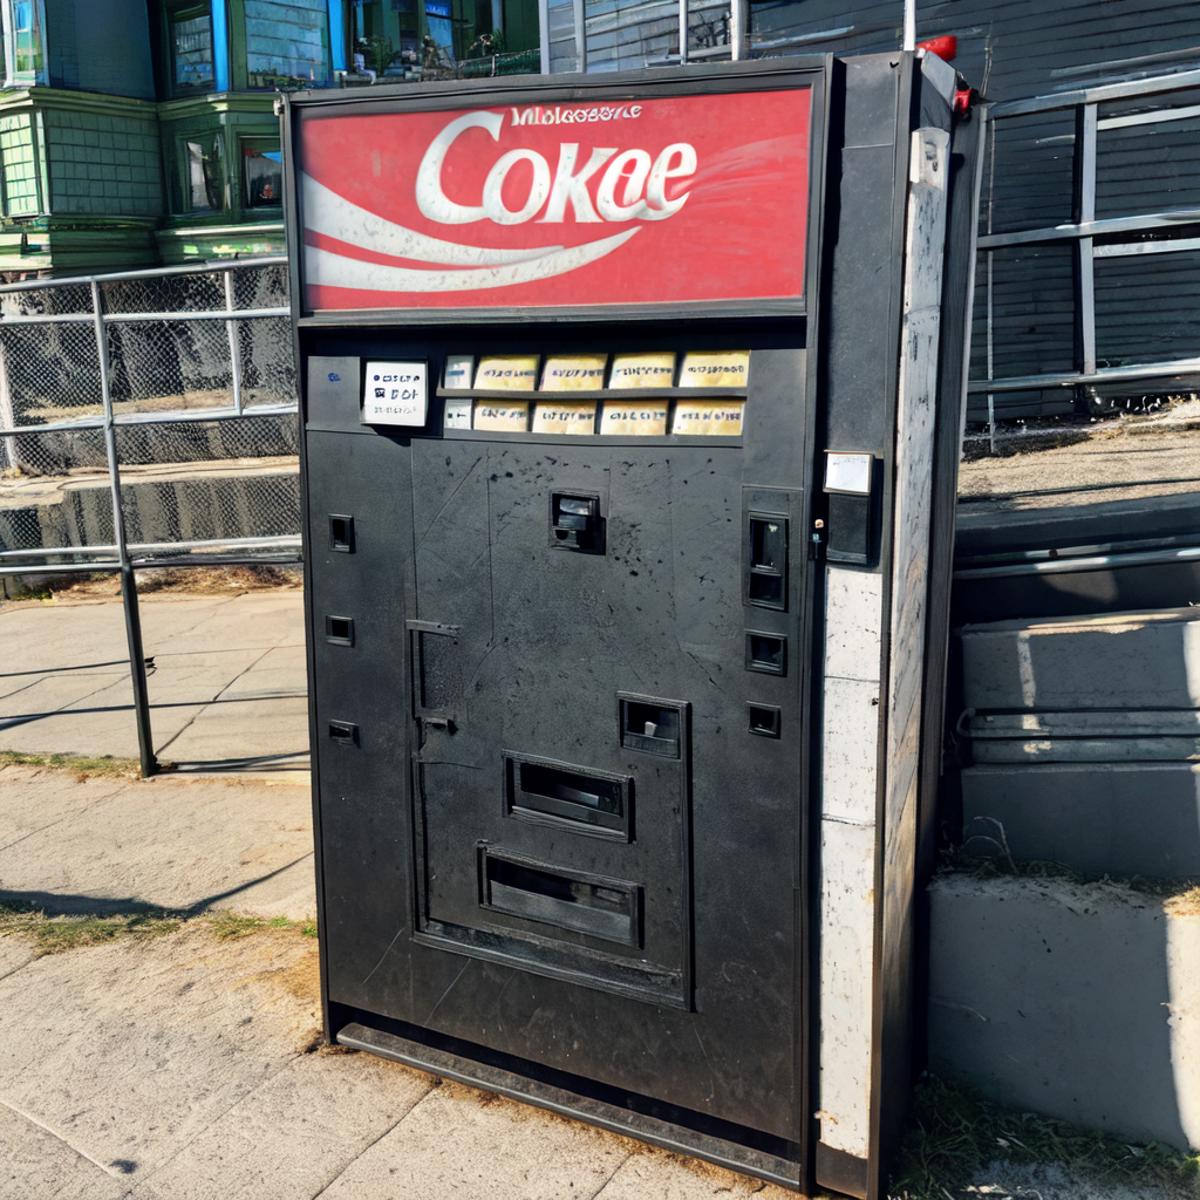 Capitol Hill's mystery soda machine image by uiouiouio